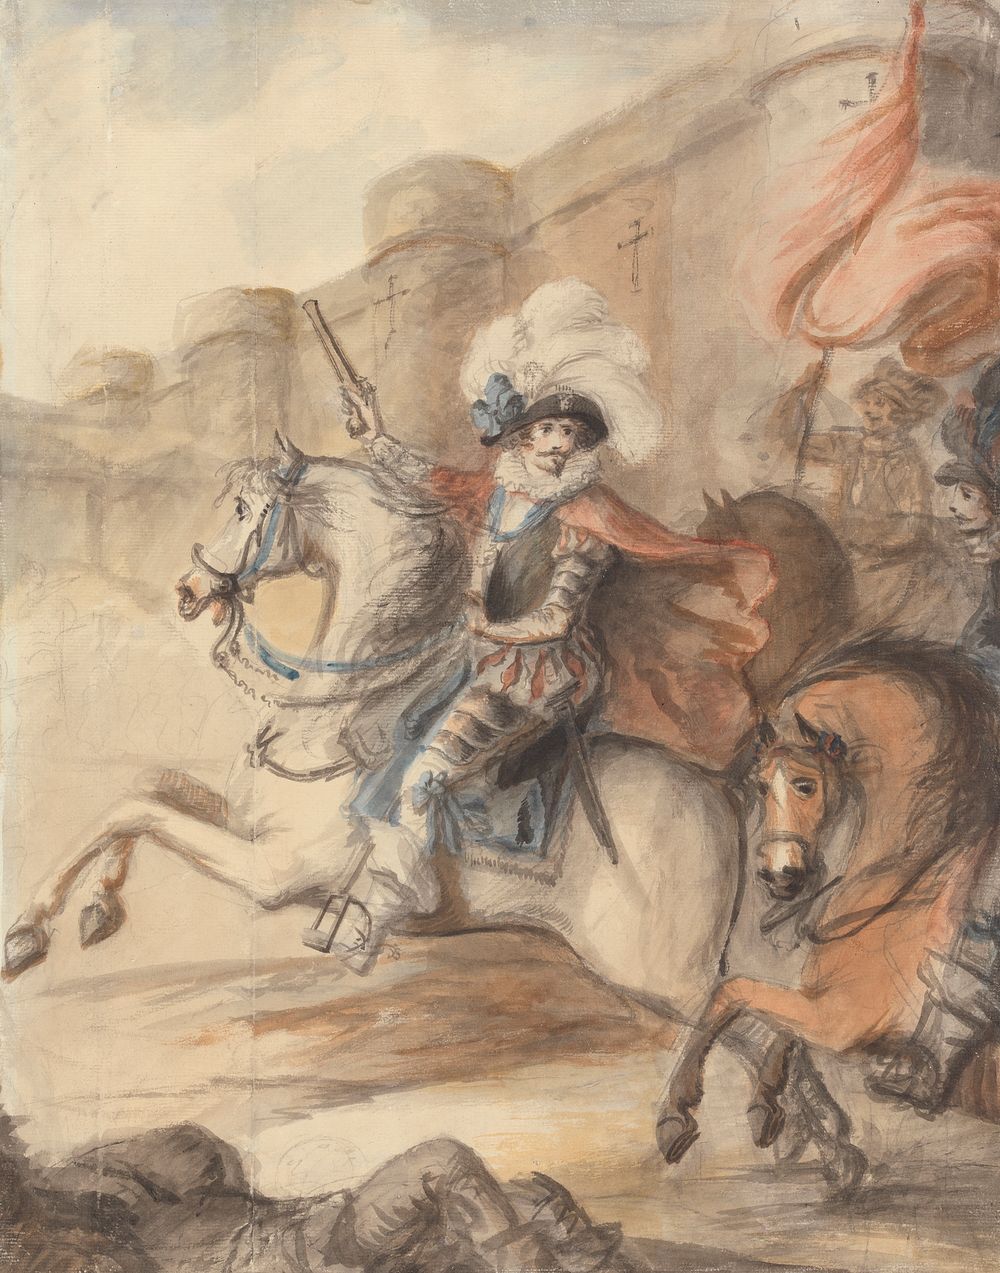 A Cavalry Officer (Henry IV) Leading a Charge Outside a Castle